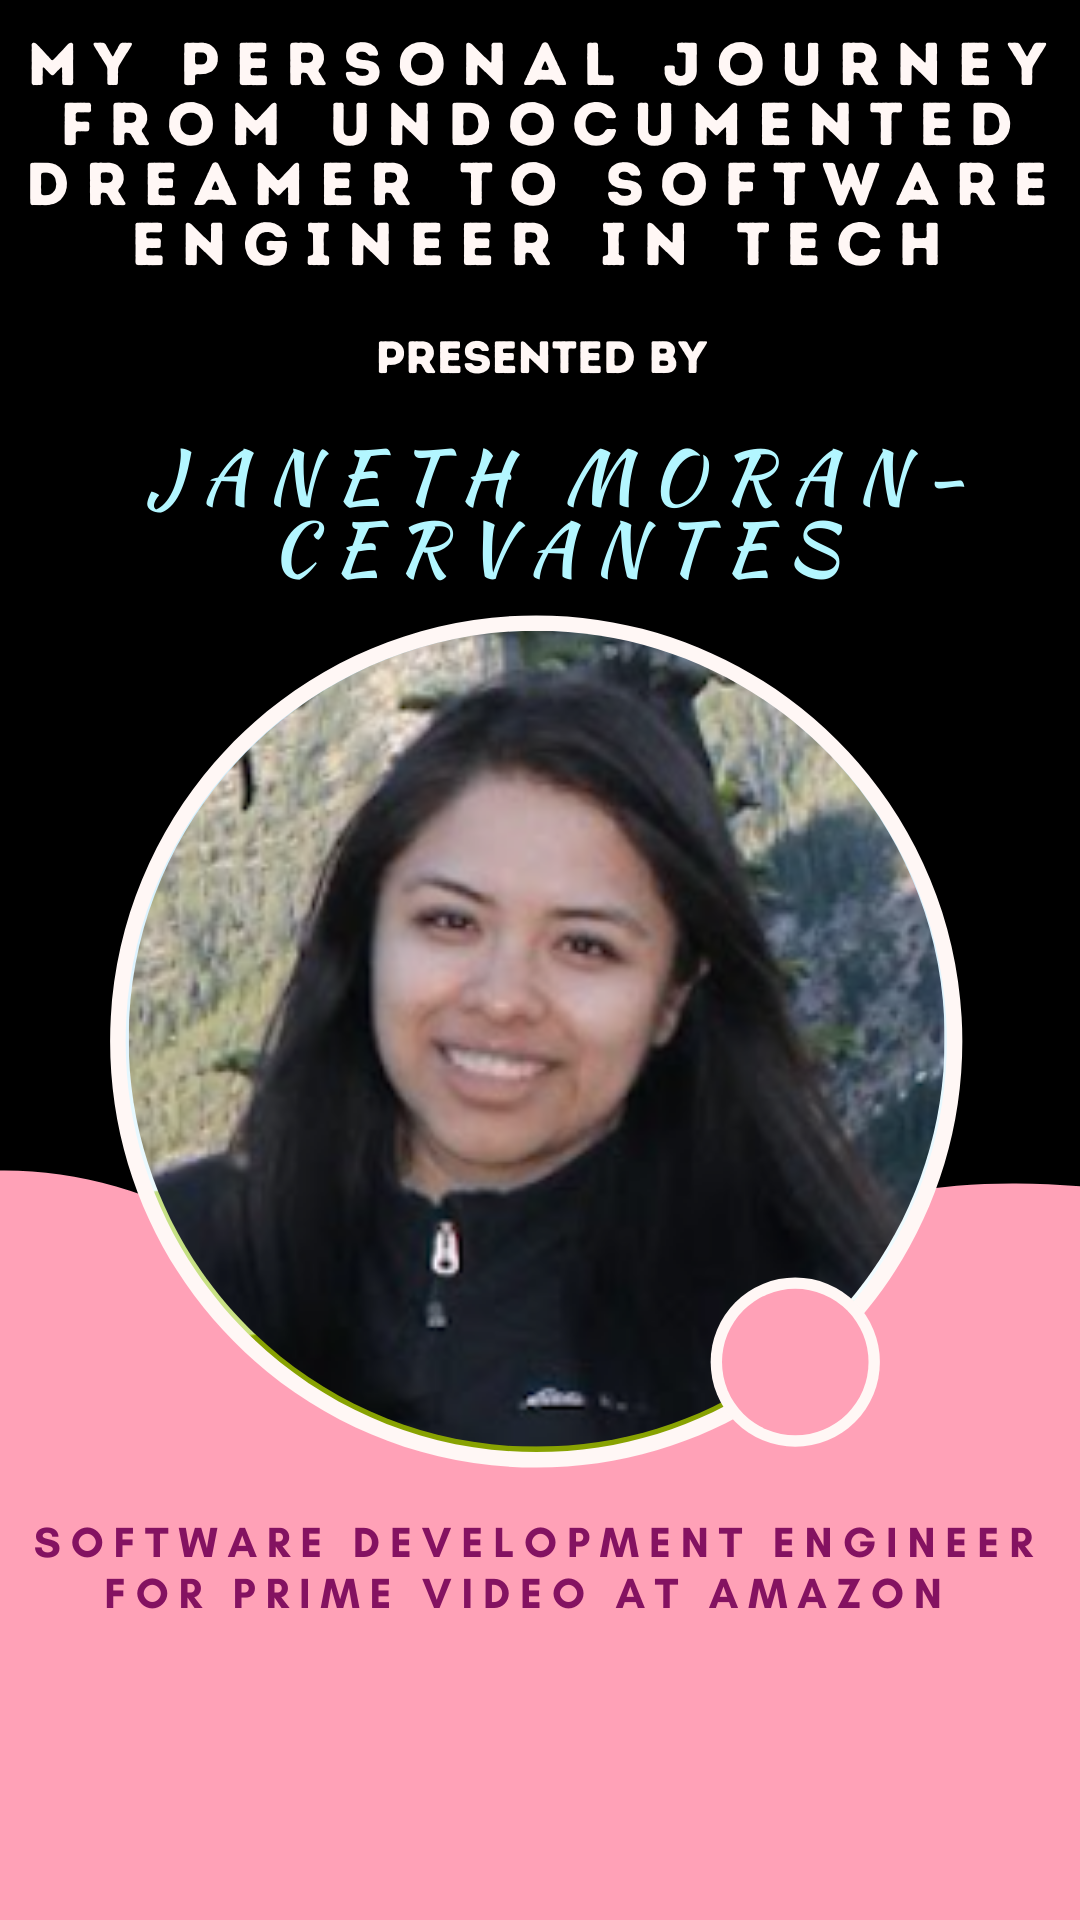 link to her talk "My personal journey from undocumented dreamer to software engineer in tech"